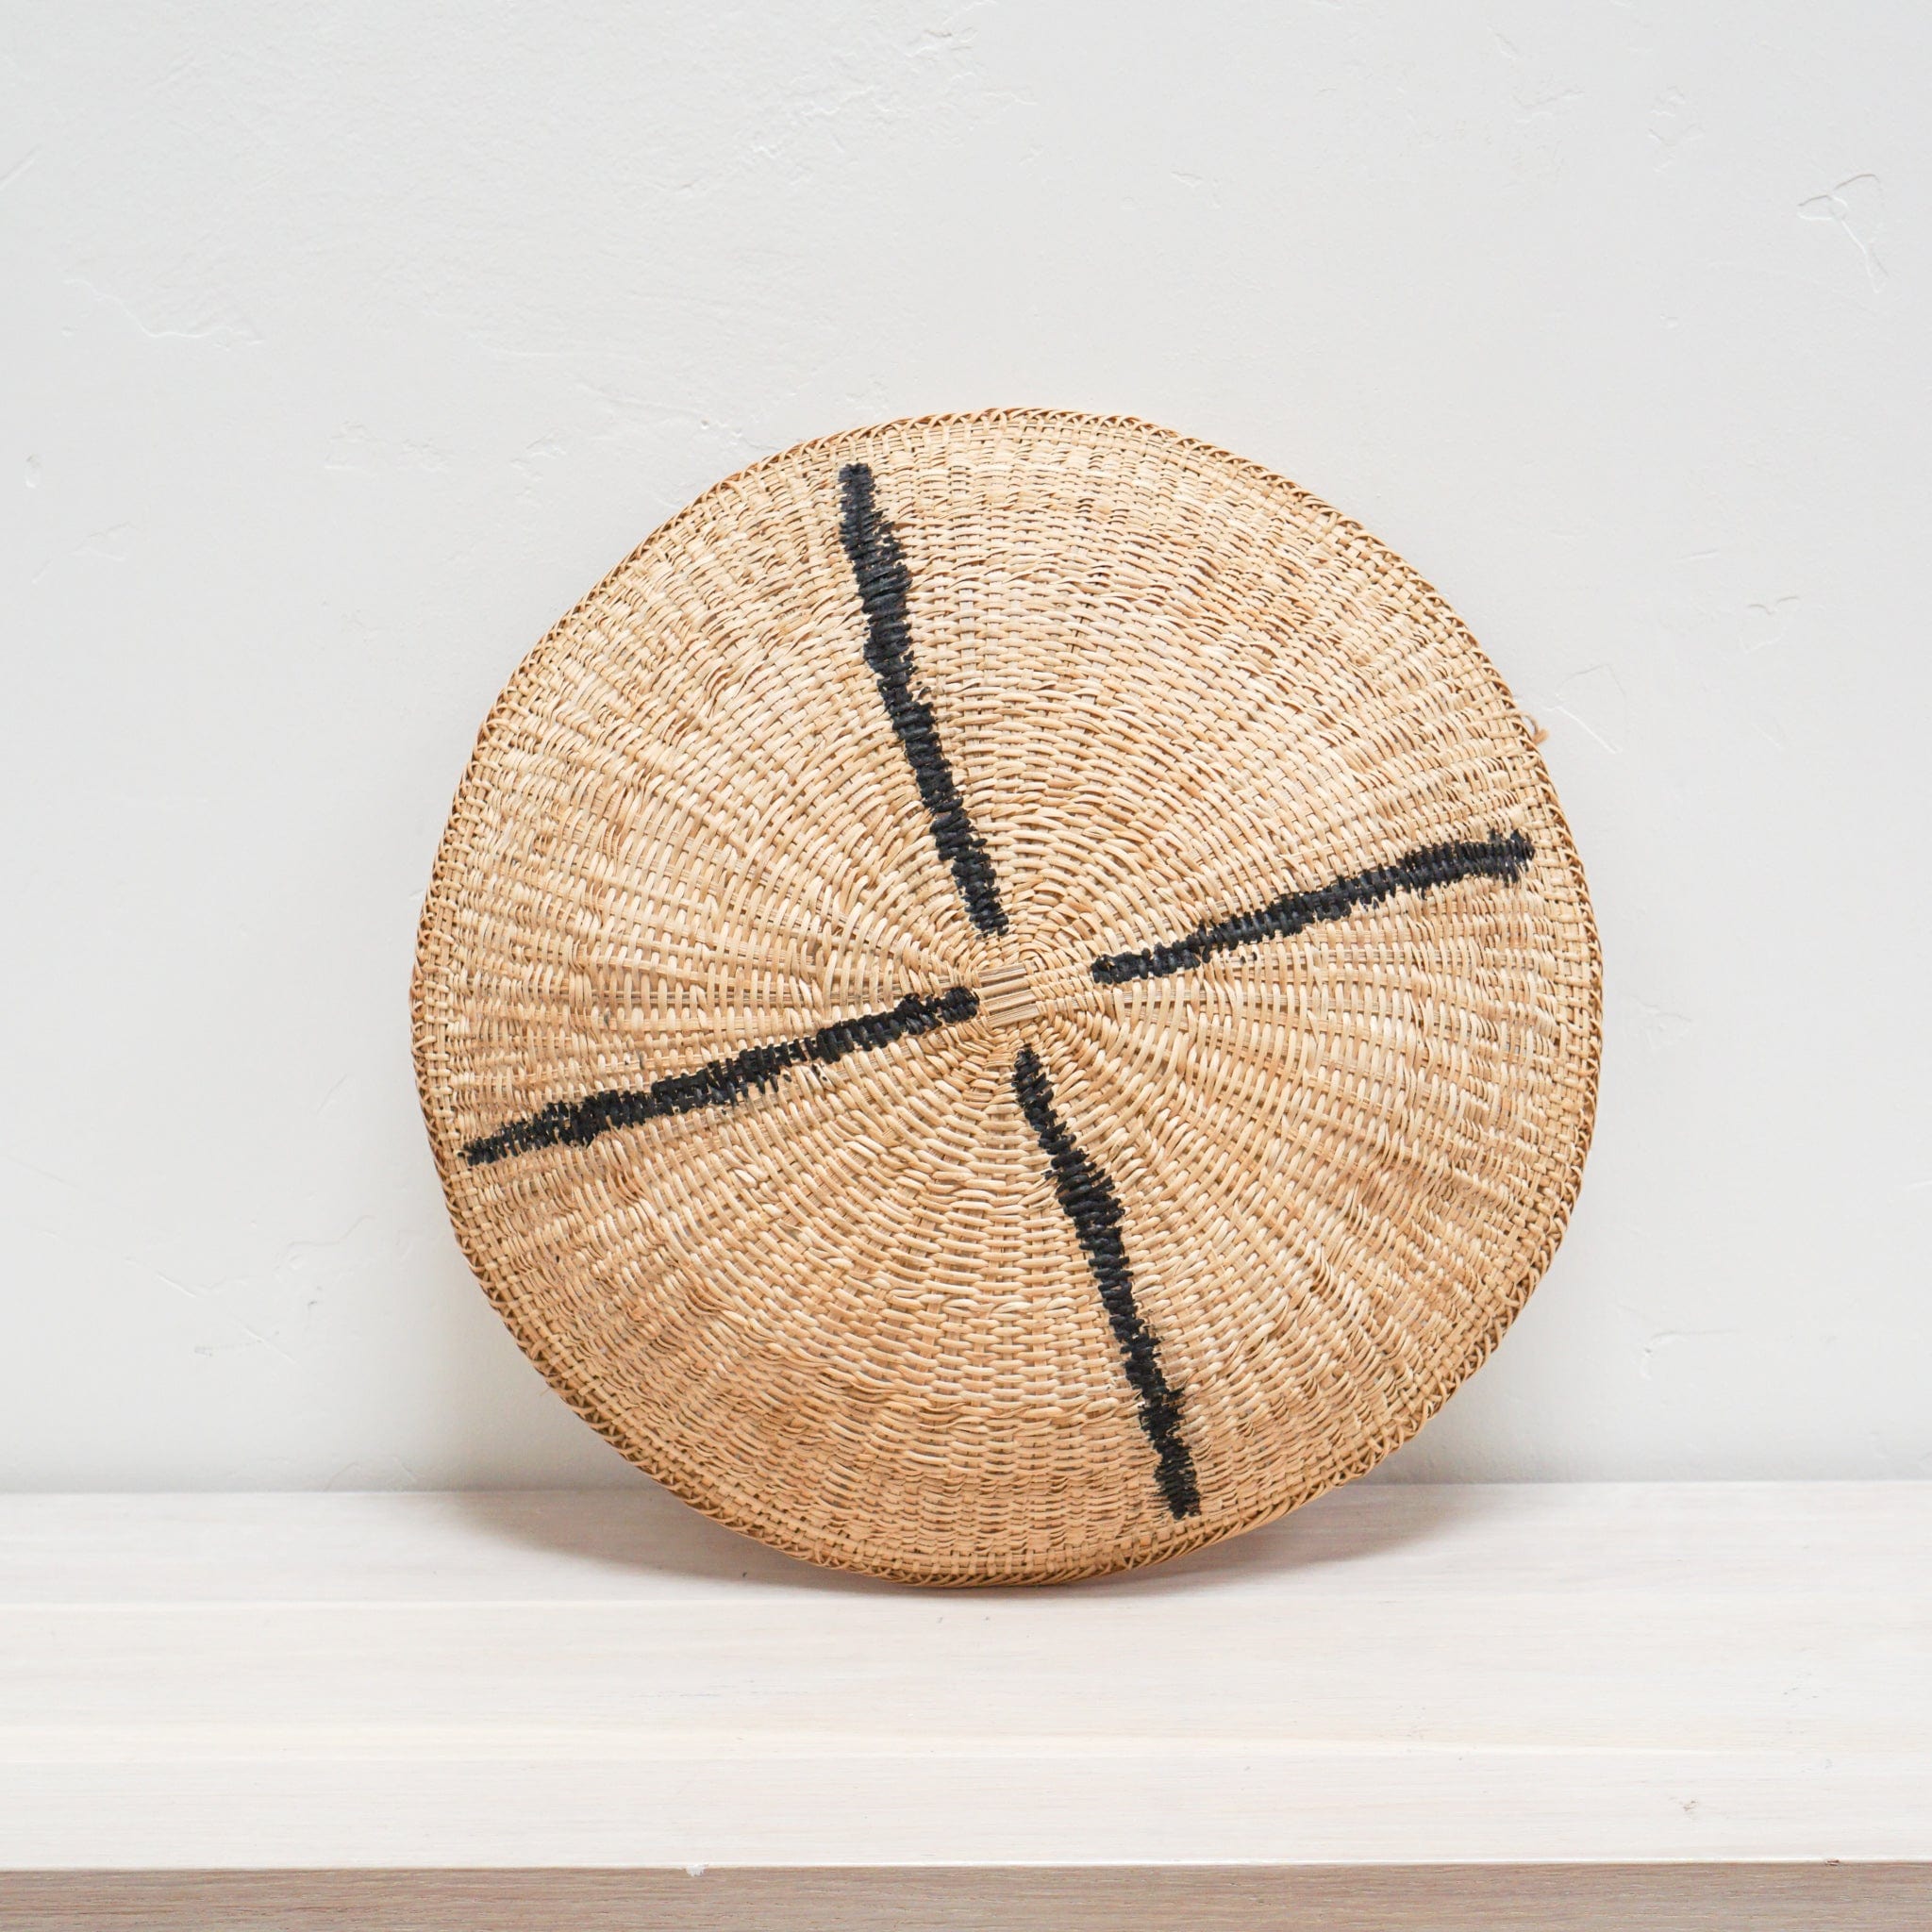 INCAUSA Garden + Utility A - Natural with black cross painting Woven Baskets with Hand Painted Graphism